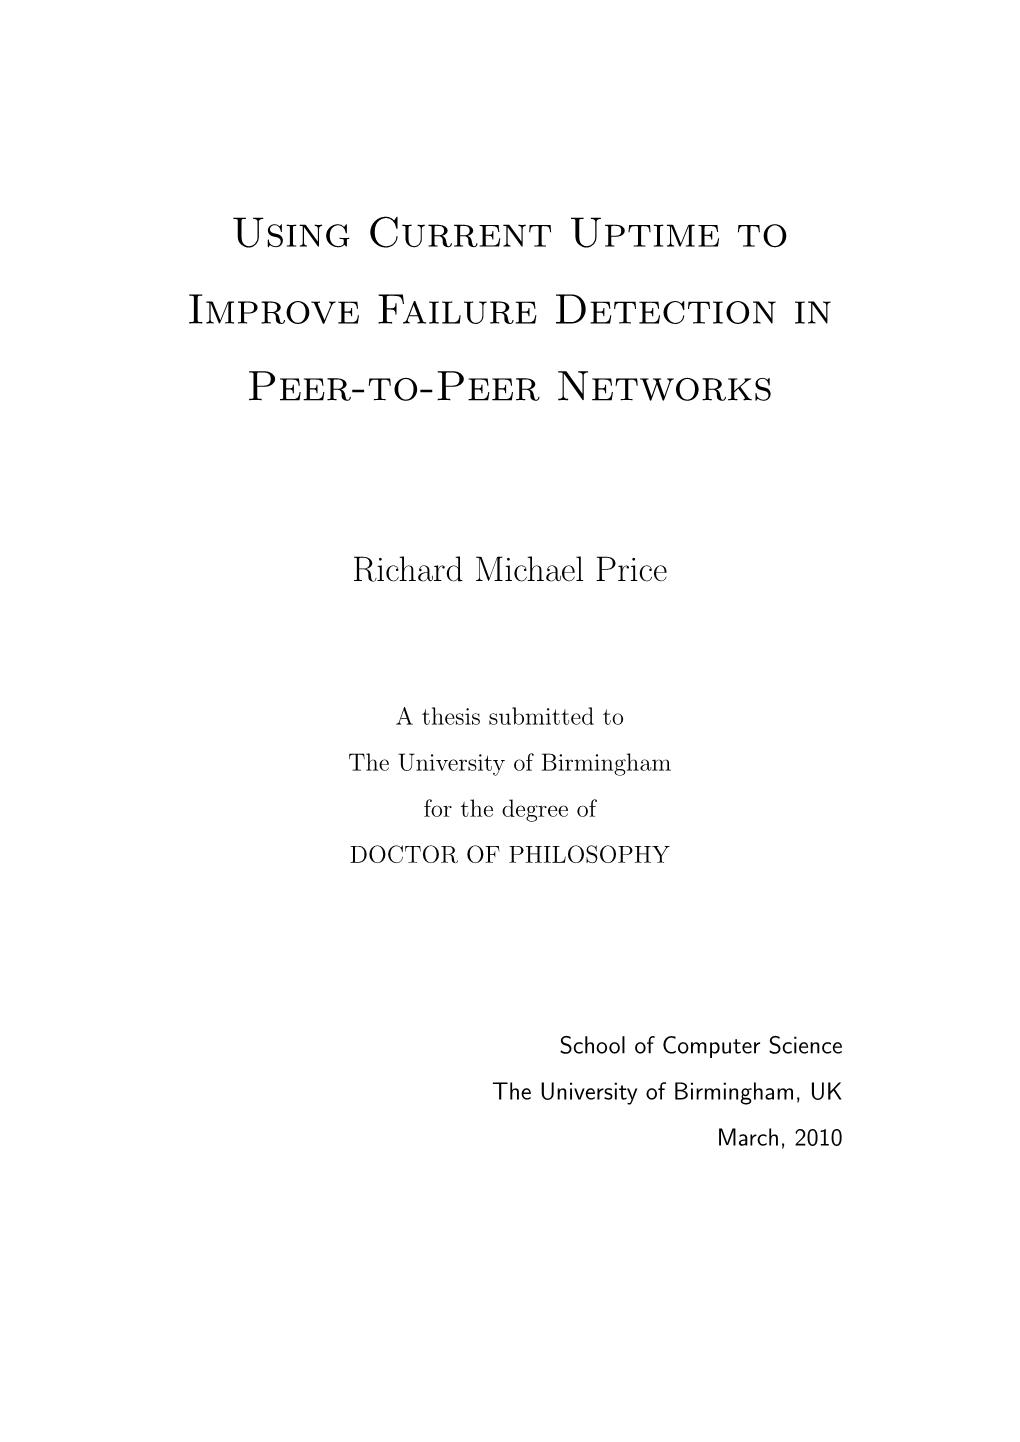 Using Current Uptime to Improve Failure Detection in Peer-To-Peer Networks